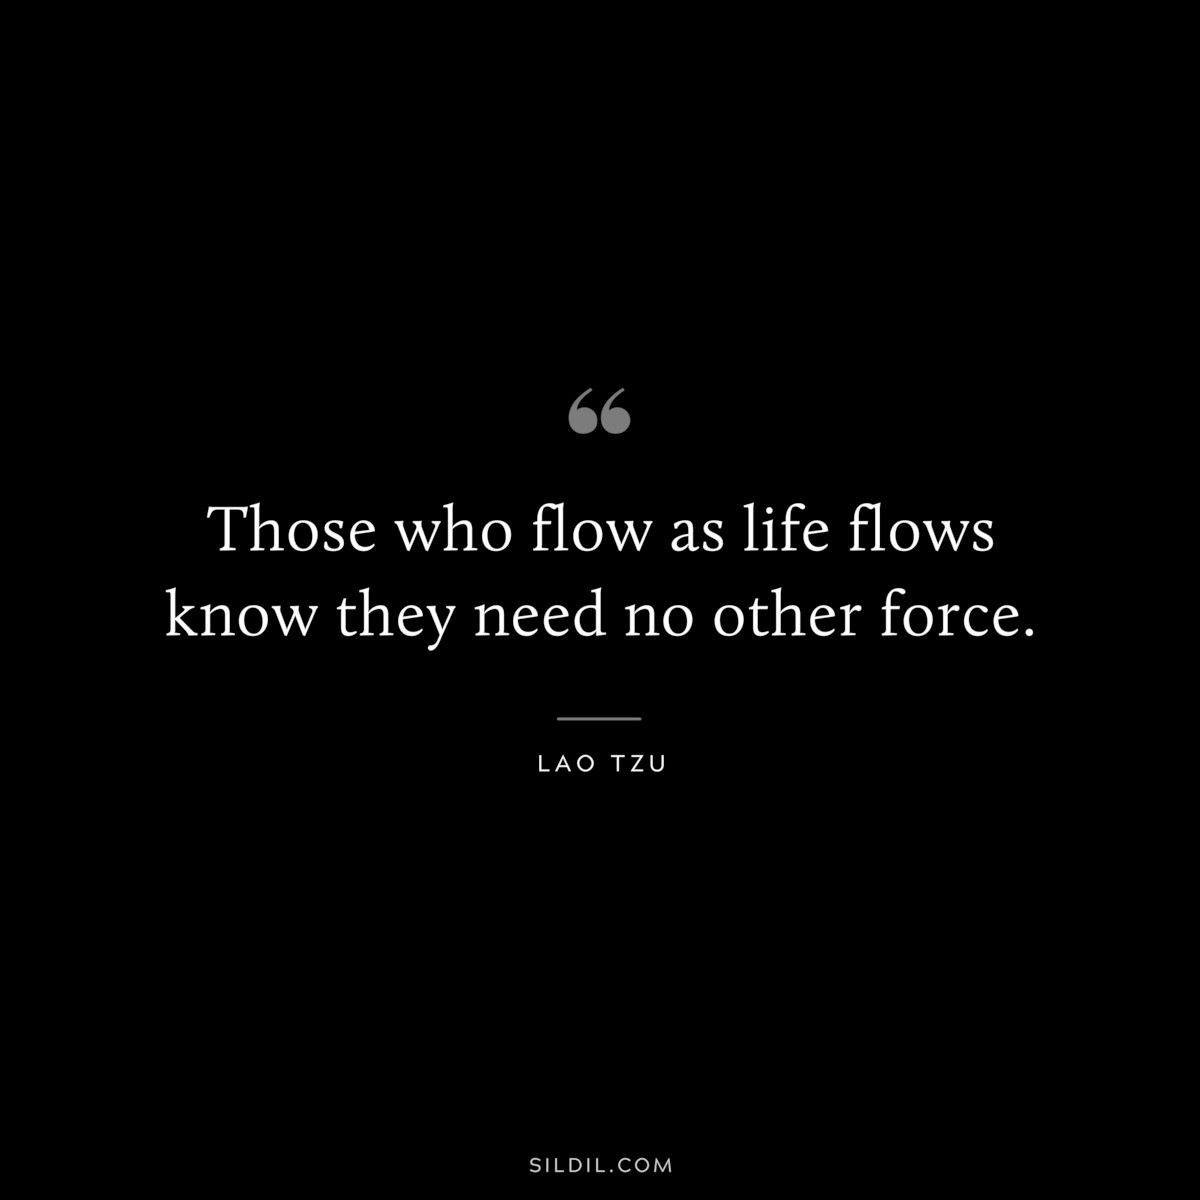 Those who flow as life flows know they need no other force. ― Lao Tzu